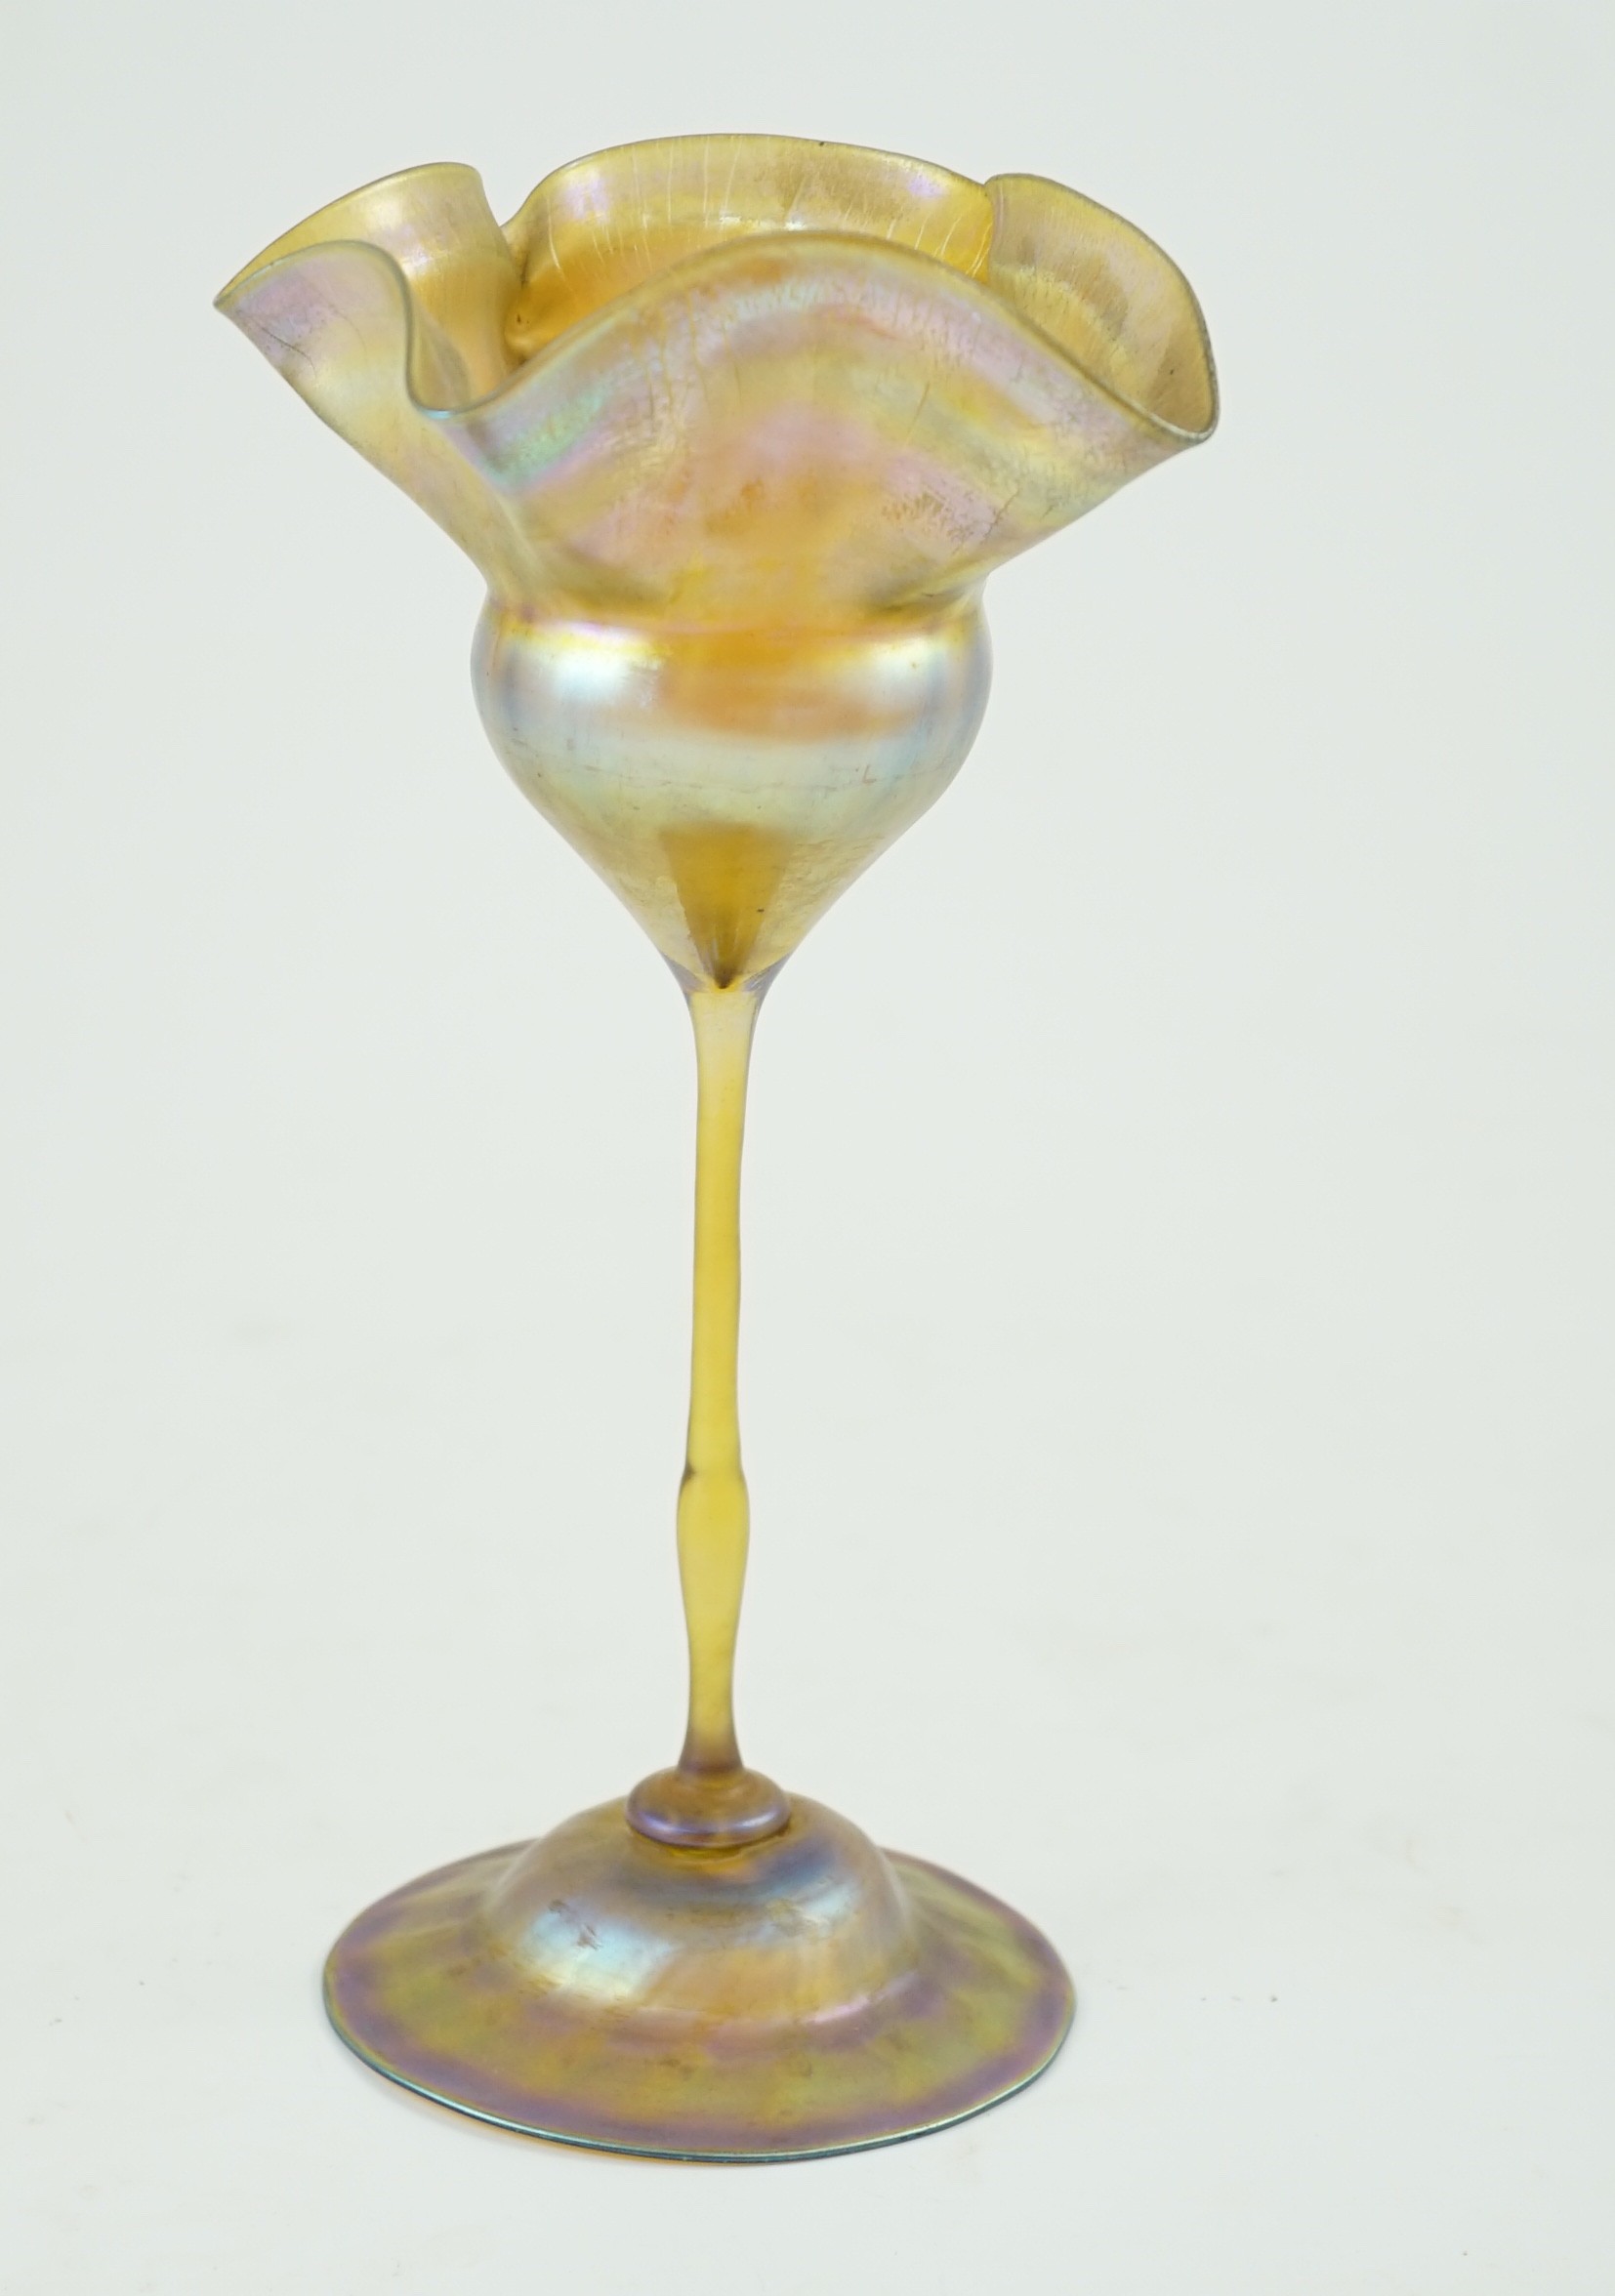 Tiffany Studios, New York. A 'Favrile' glass flowerform vase, etched makers mark L.C.T. (Louis Comfort Tiffany), pattern Y1959, c.1907, 26cm high